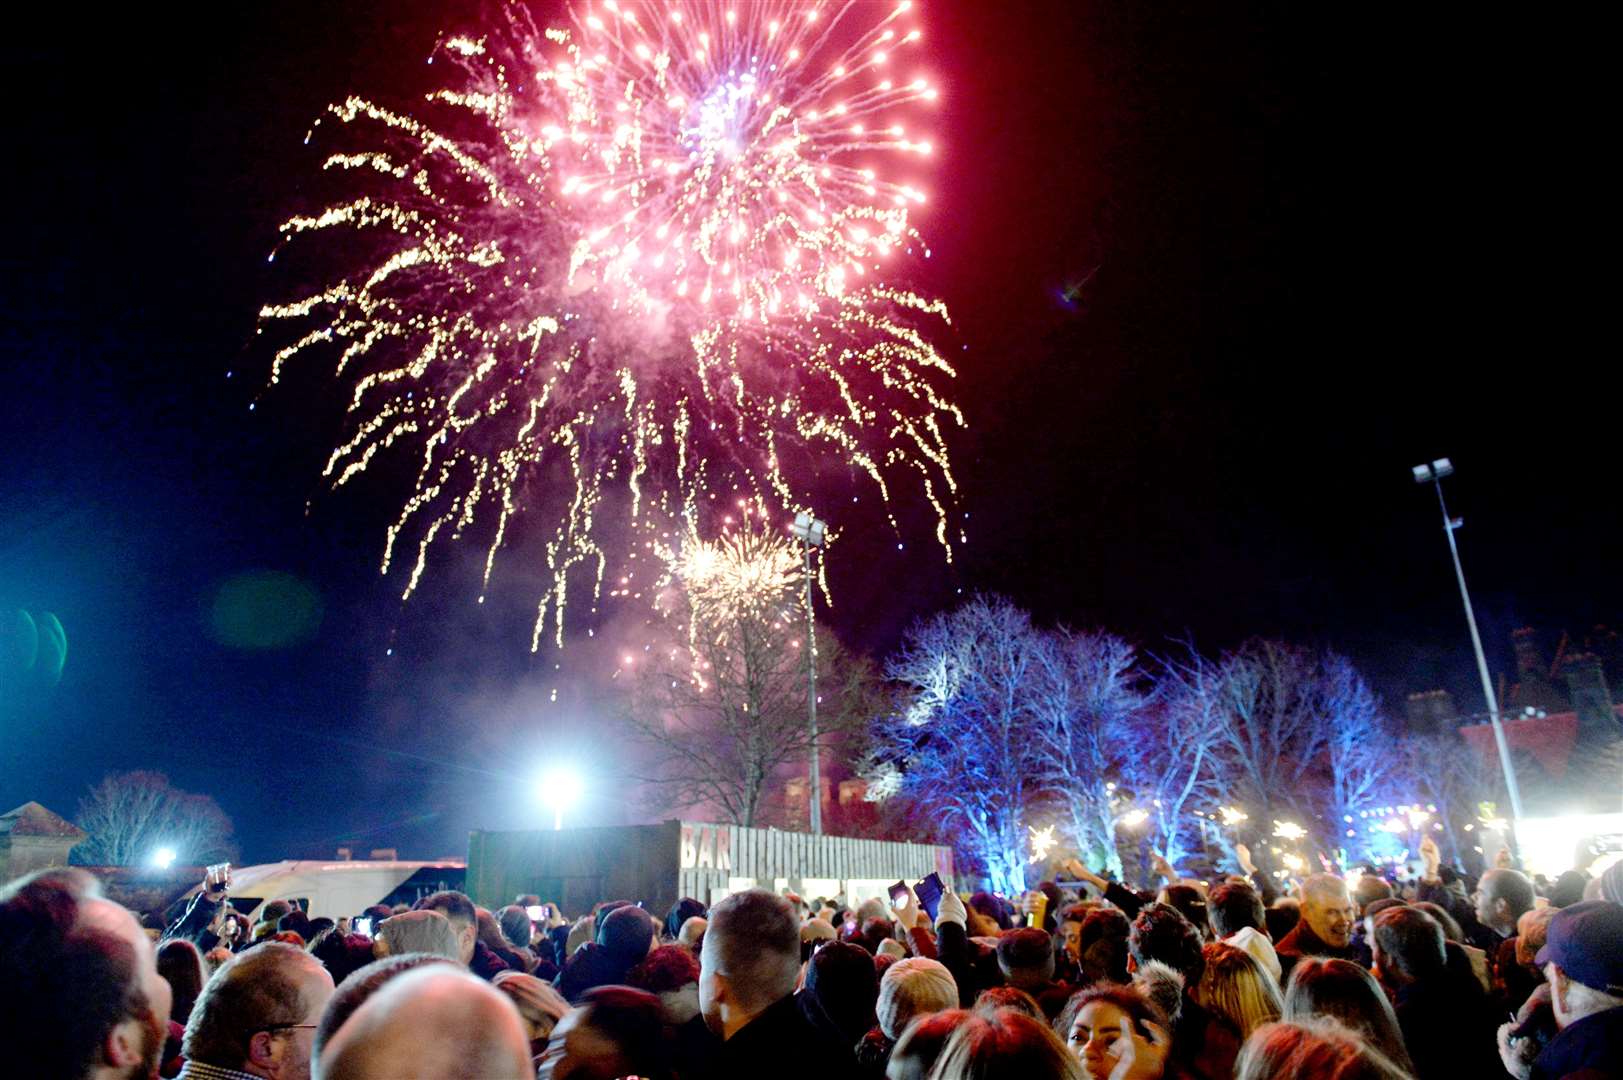 Events happening in Inverness this Hogmanay weekend.